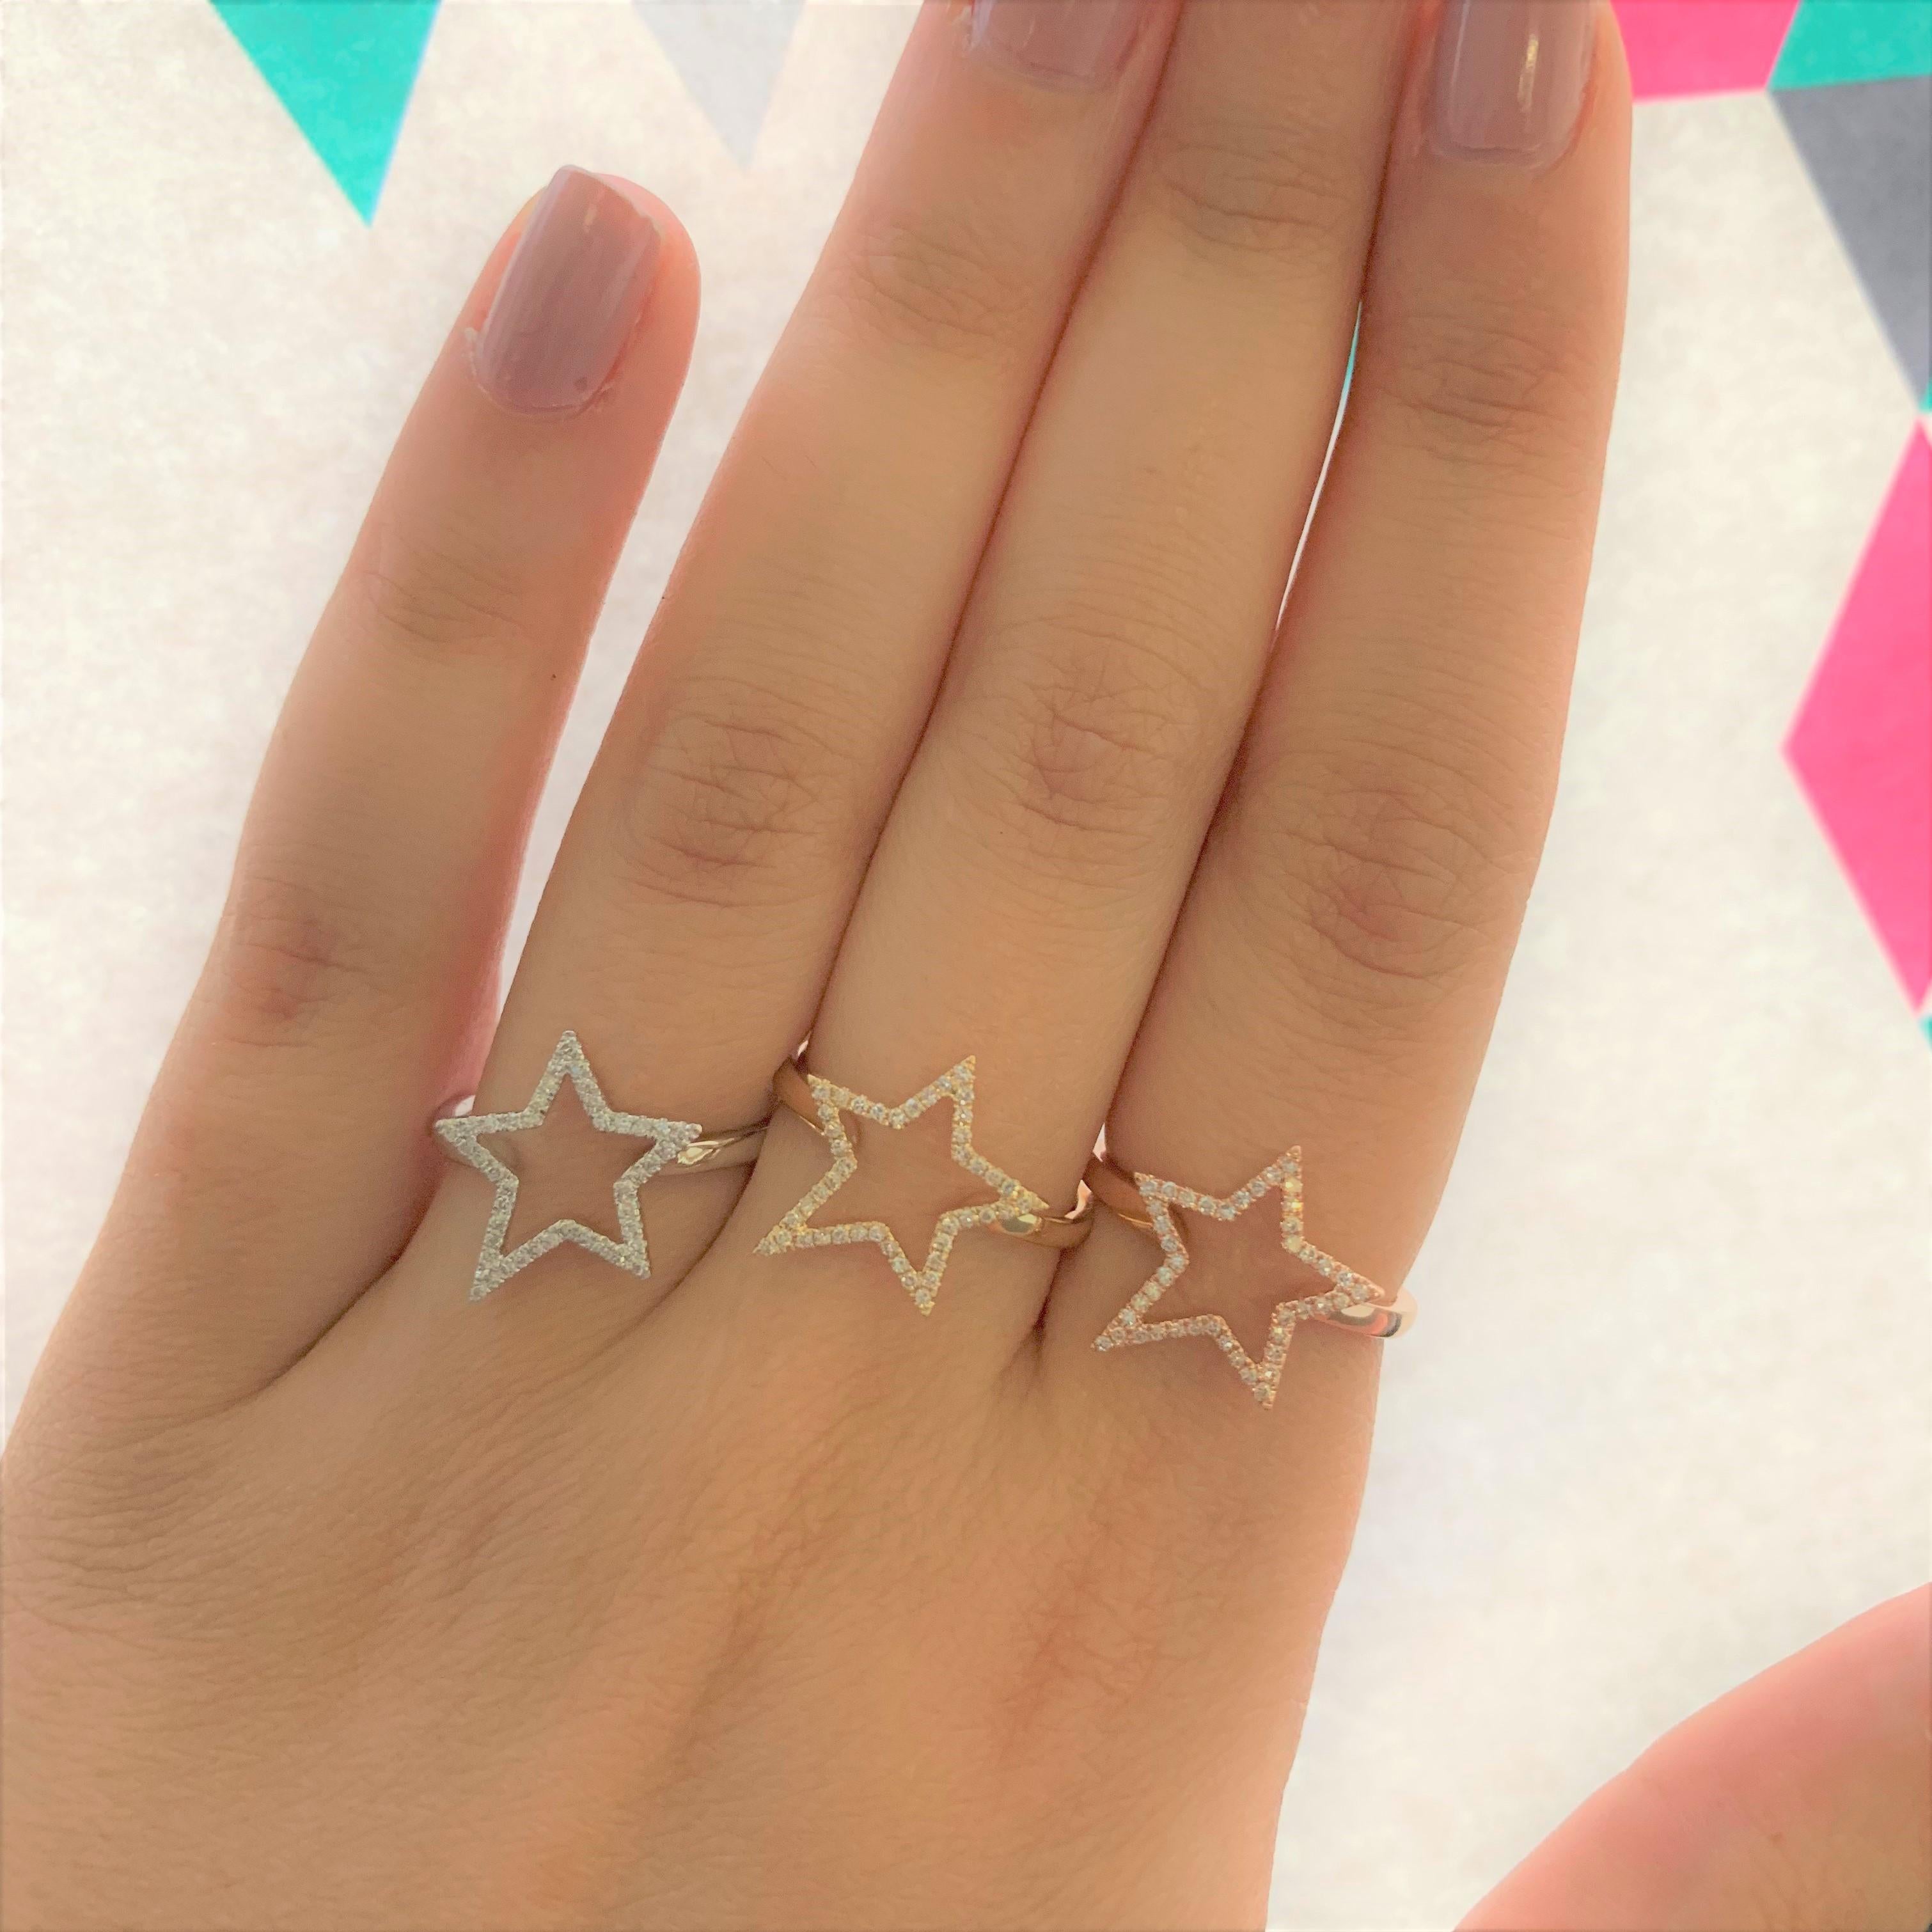 Crafted of 14k gold and available in 3 gold colors, this trendy yet classic Star design ring features approximately 0.14 ct of shimmering round diamonds. Diamond Color and Clarity is GH SI1-SI2.
-14K Gold
-0.14cts White Diamonds
-Diamond Color